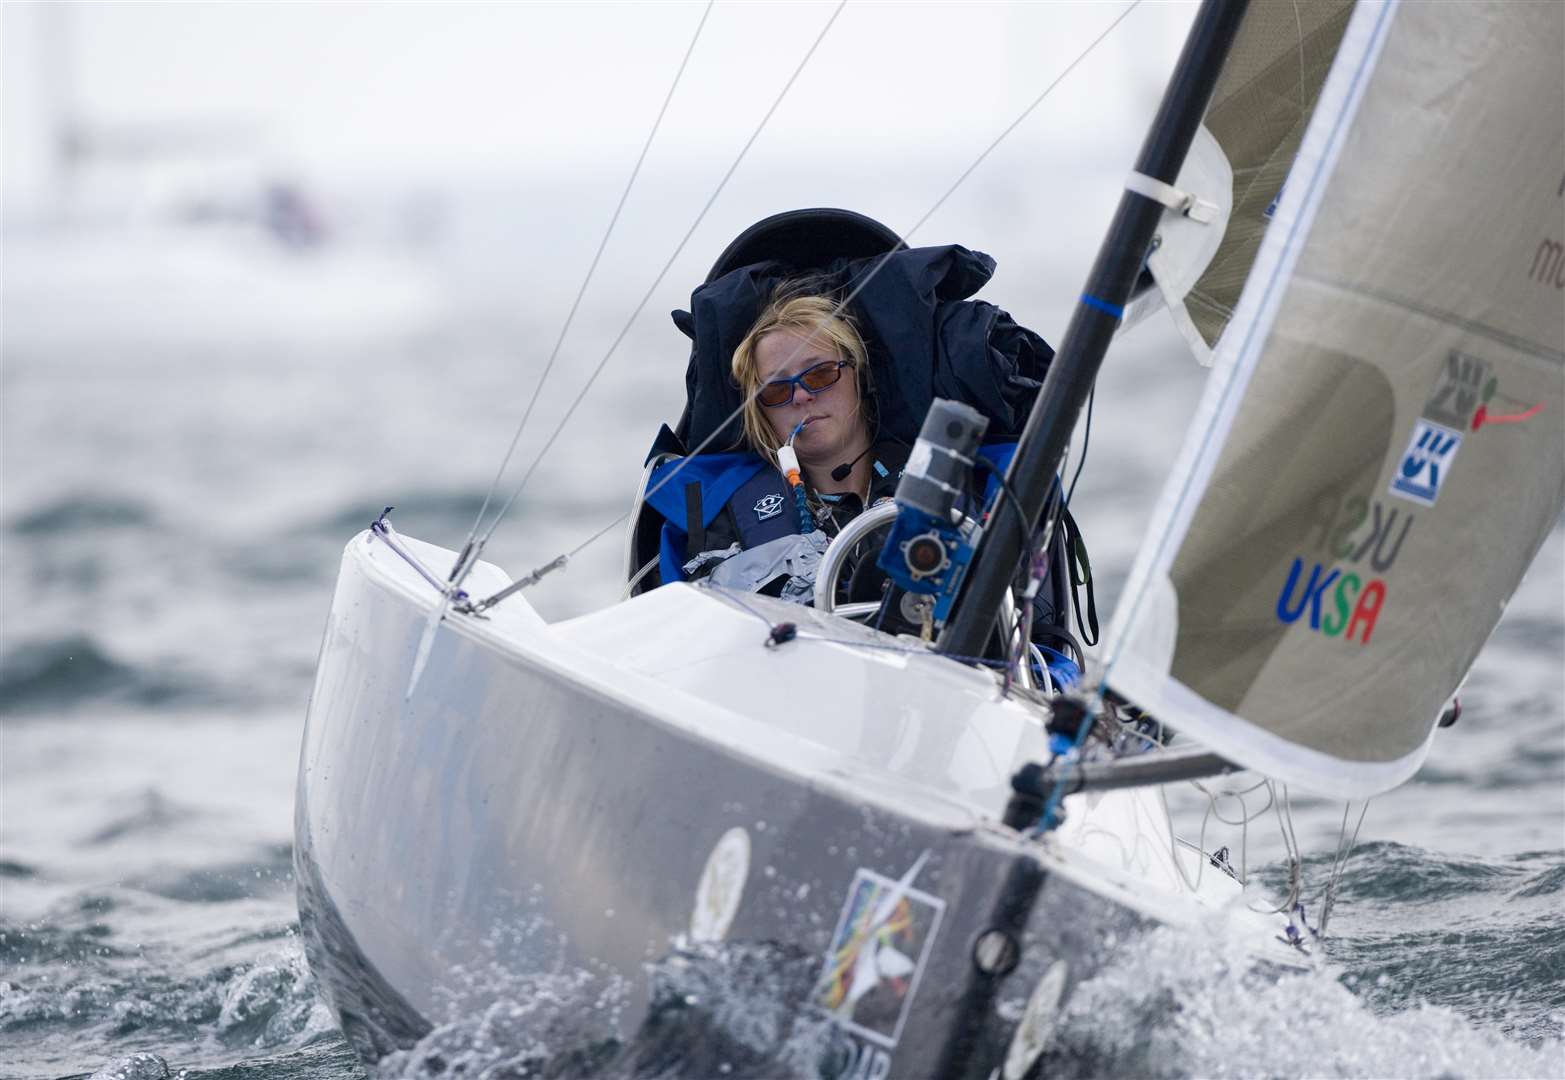 Hilary as she became the first female quadriplegic to sail solo around the Isle of Wight